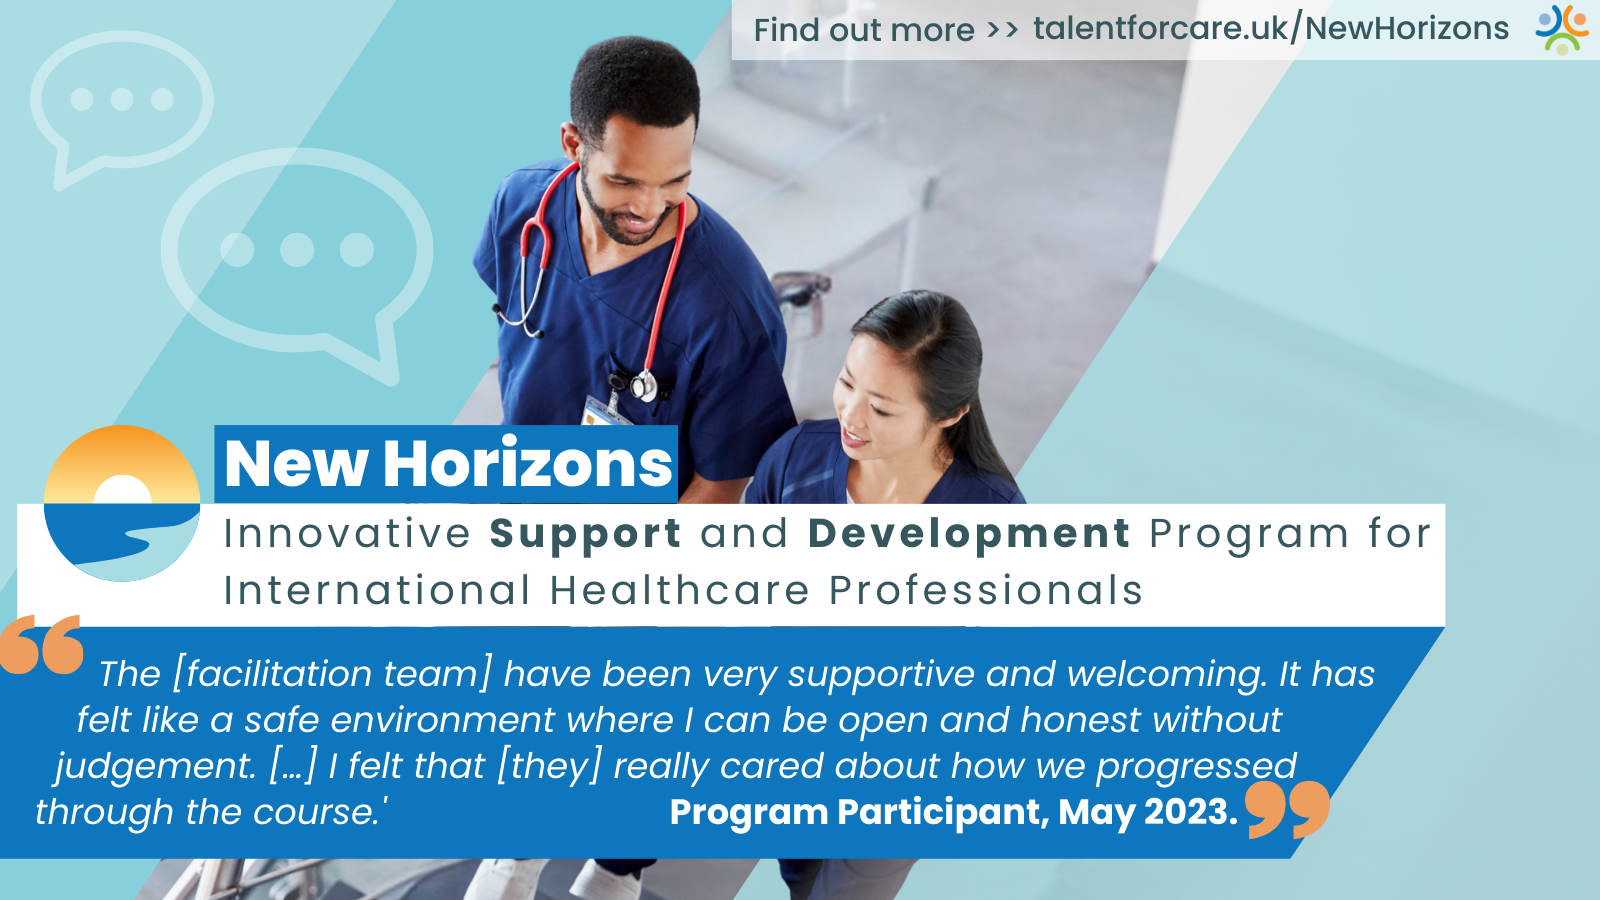 New Horizons, innovative support and development program for international healthcare professionals. "the facilitation team have been very supportive and welcoming. it has felt like a safe environment where I can be open and honest without judgement. I felt that they really cared about how we progressed through the course." program participant, September 2023